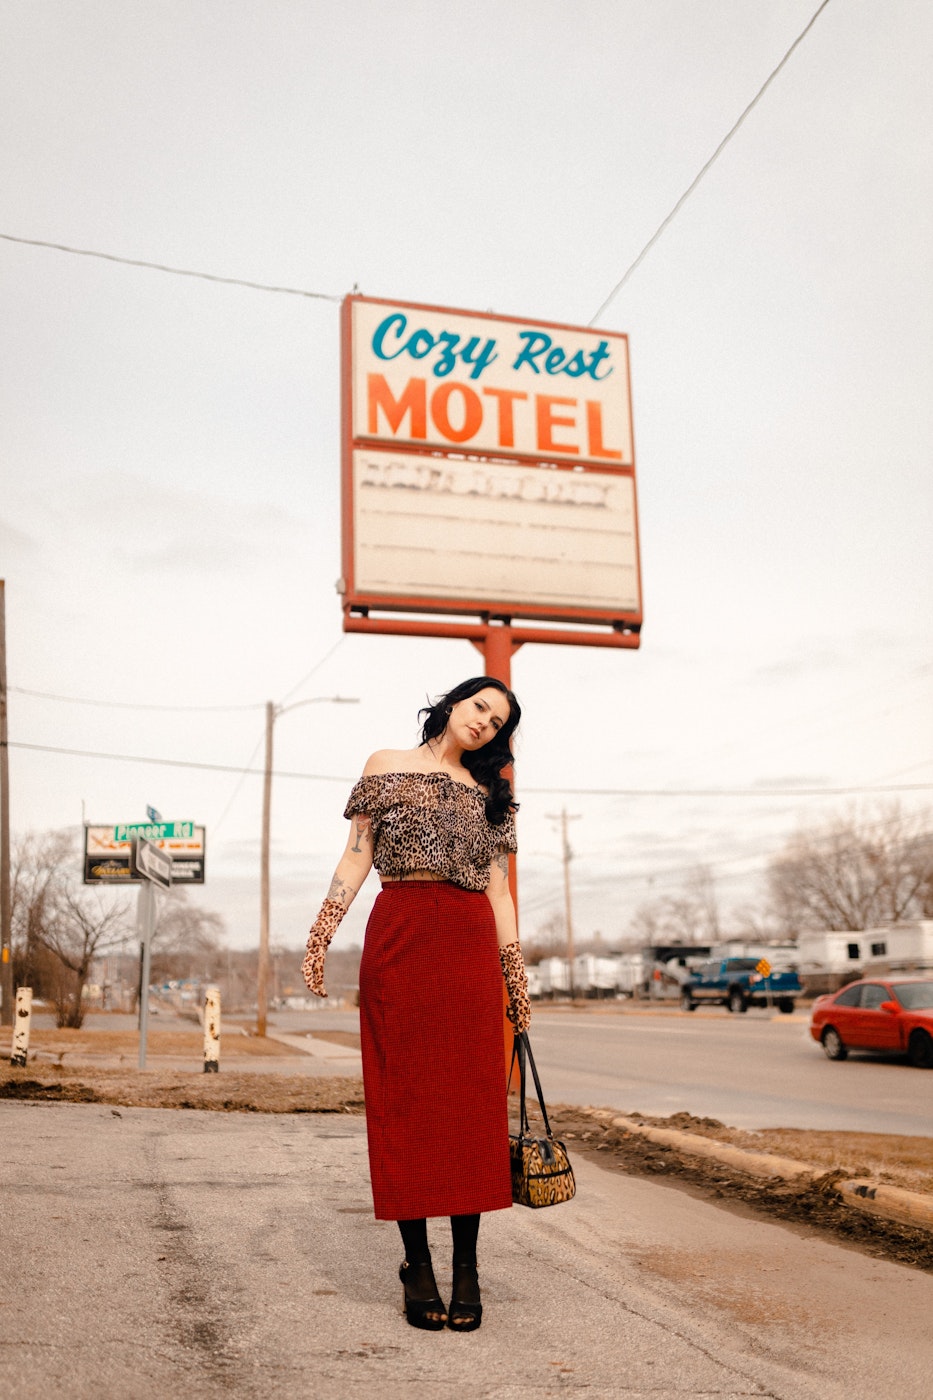 a woman in a red skirt holding up a motel sign